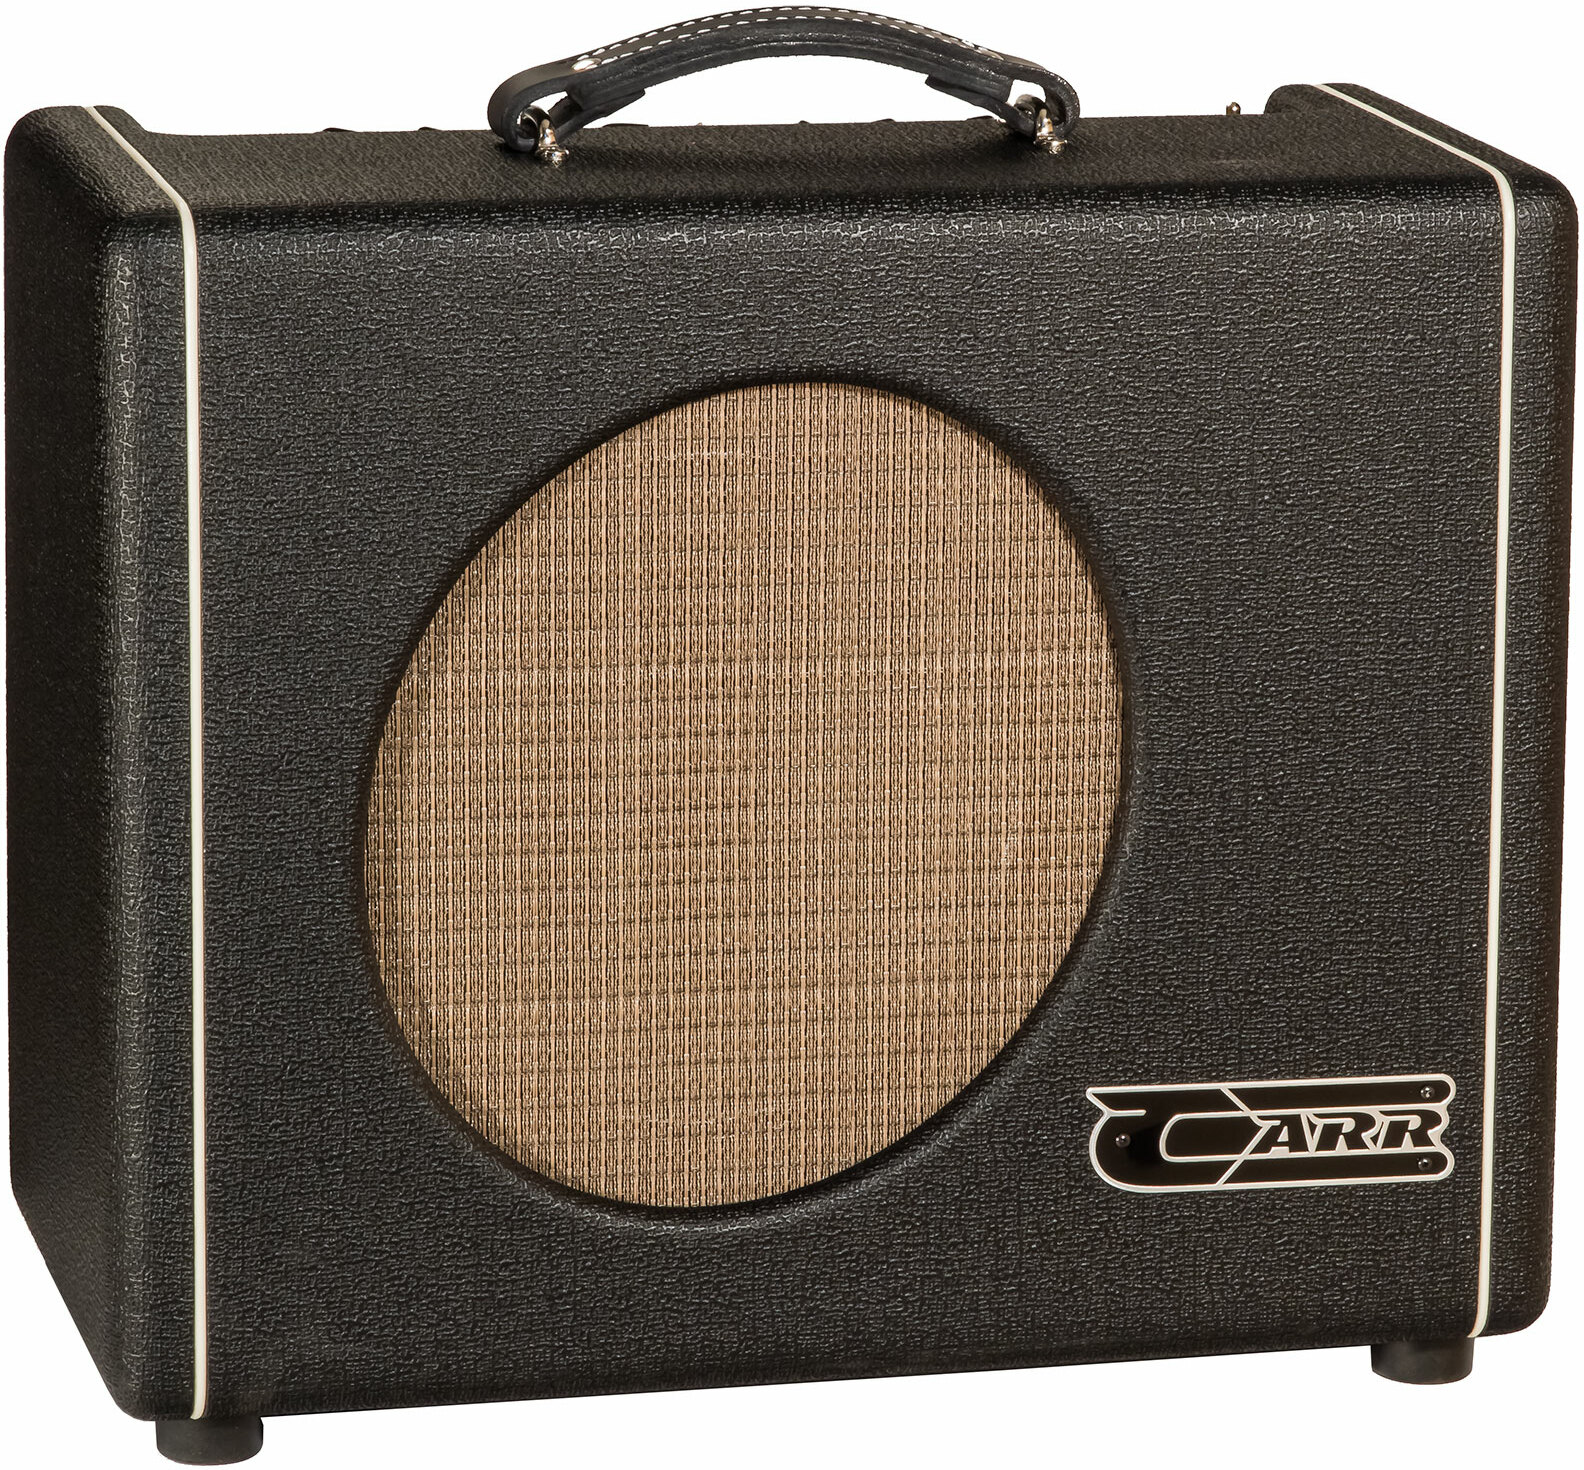 Carr Amplifiers Mercury V 1-12 Combo 16w 1x12 6v6 Black - Electric guitar combo amp - Main picture